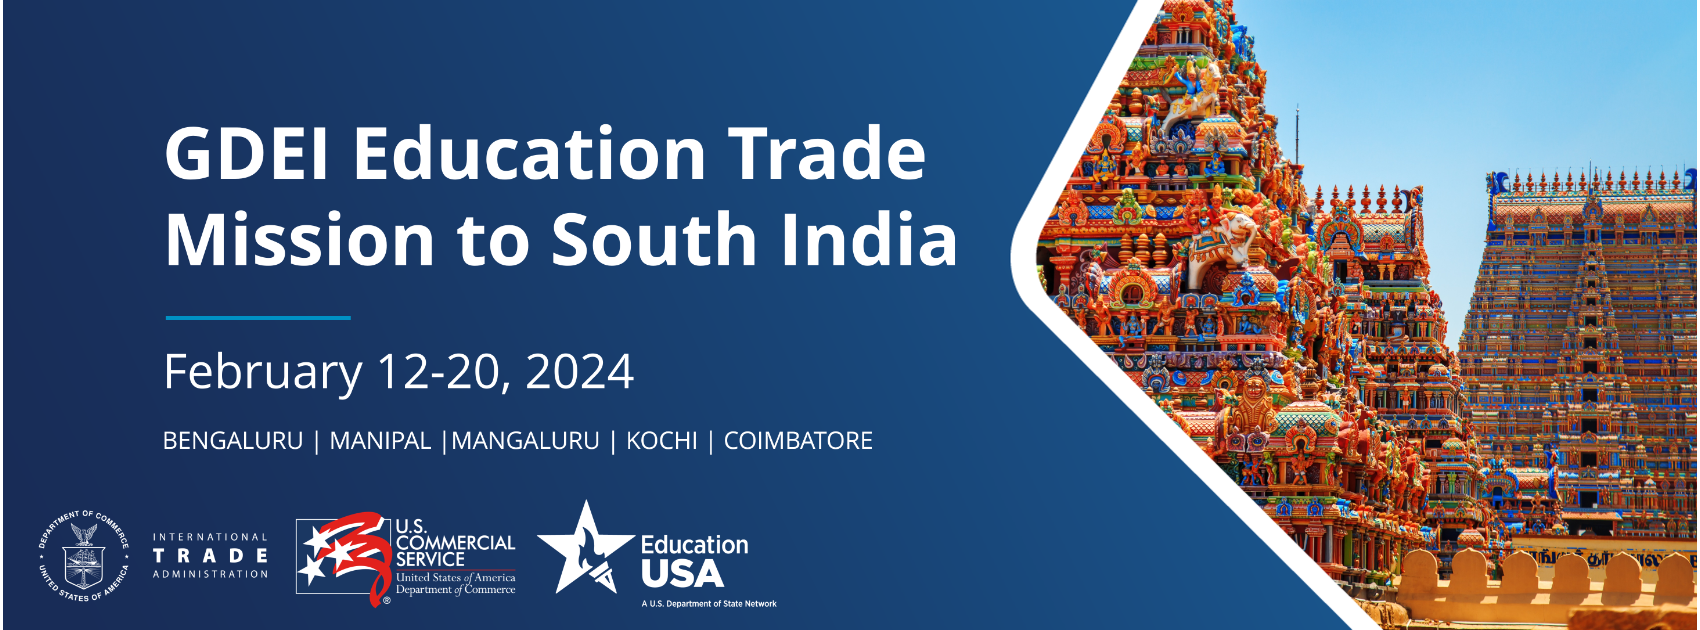 GDEI Education Trade Mission to India 2024